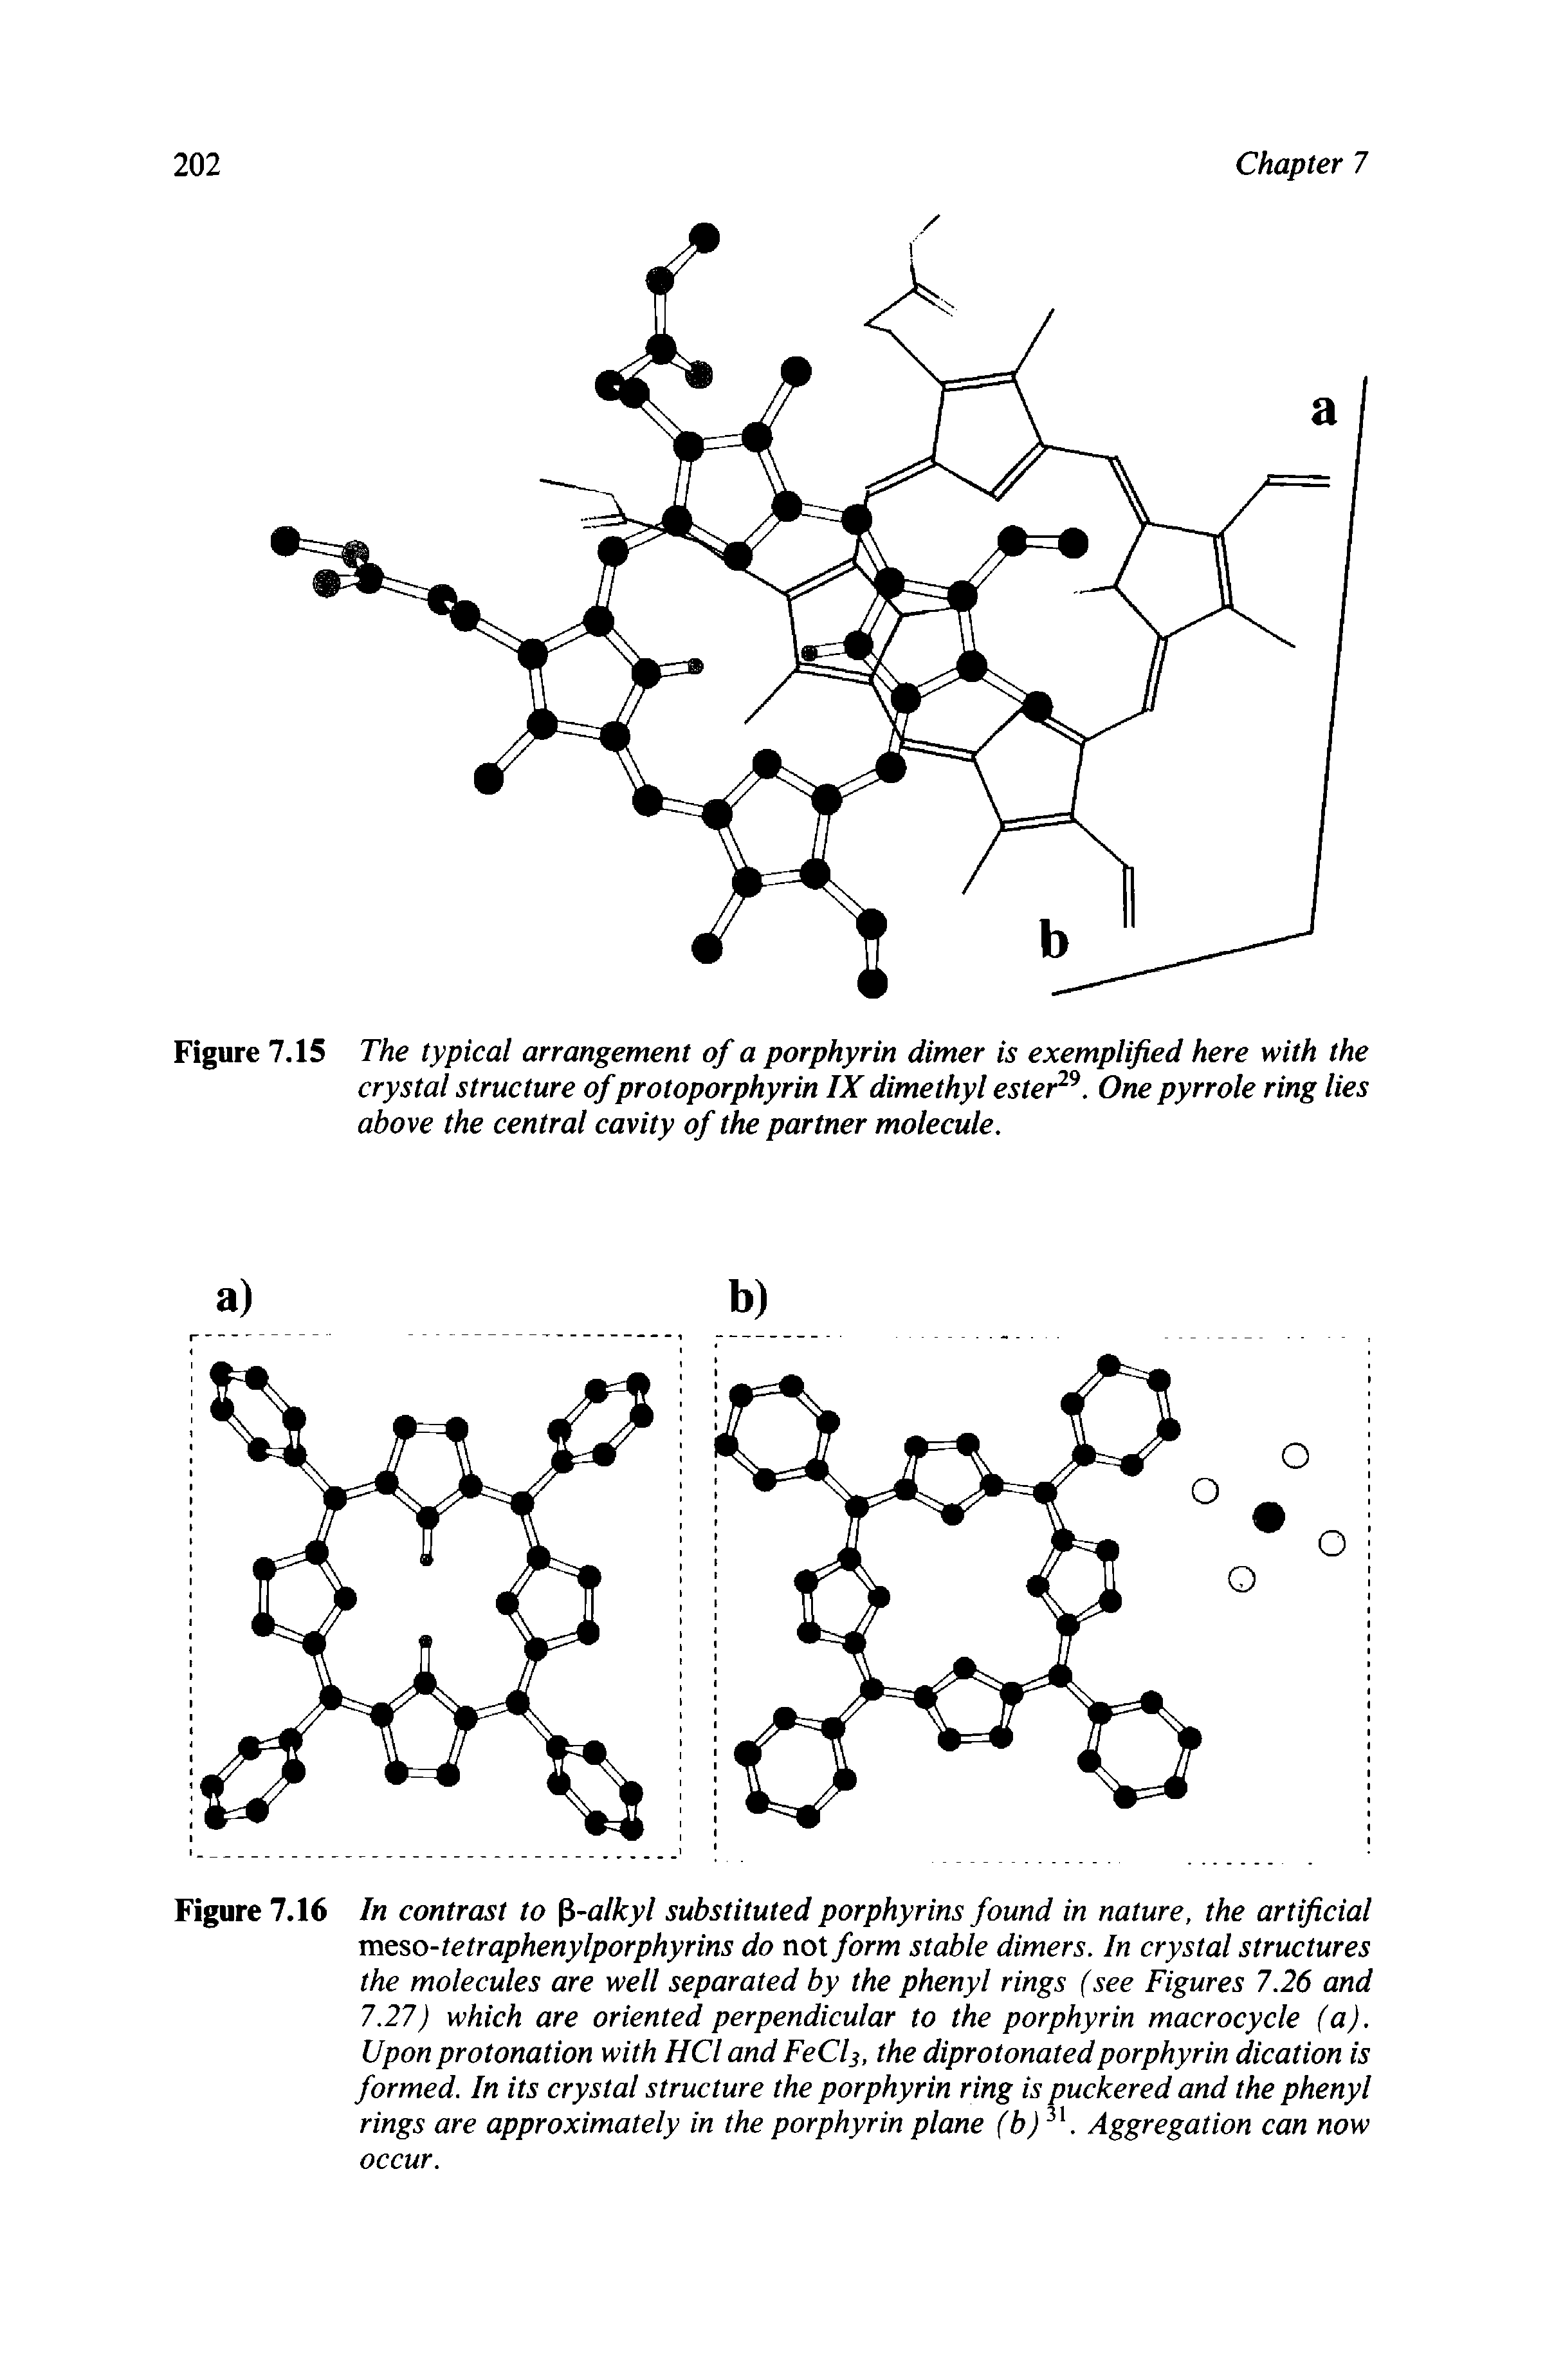 Figure 7.16 In contrast to -alkyl substituted porphyrins found in nature, the artificial raeso-tetraphenylporphyrins do not form stable dimers. In crystal structures the molecules are well separated by the phenyl rings (see Figures 7.26 and 7.27) which are oriented perpendicular to the porphyrin macrocycle (a). Upon protonation with HCl and FeCf, the diprotonated porphyrin dication is formed. In its crystal structure the porphyrin ring is puckered and the phenyl rings are approximately in the porphyrin plane (b). Aggregation can now...